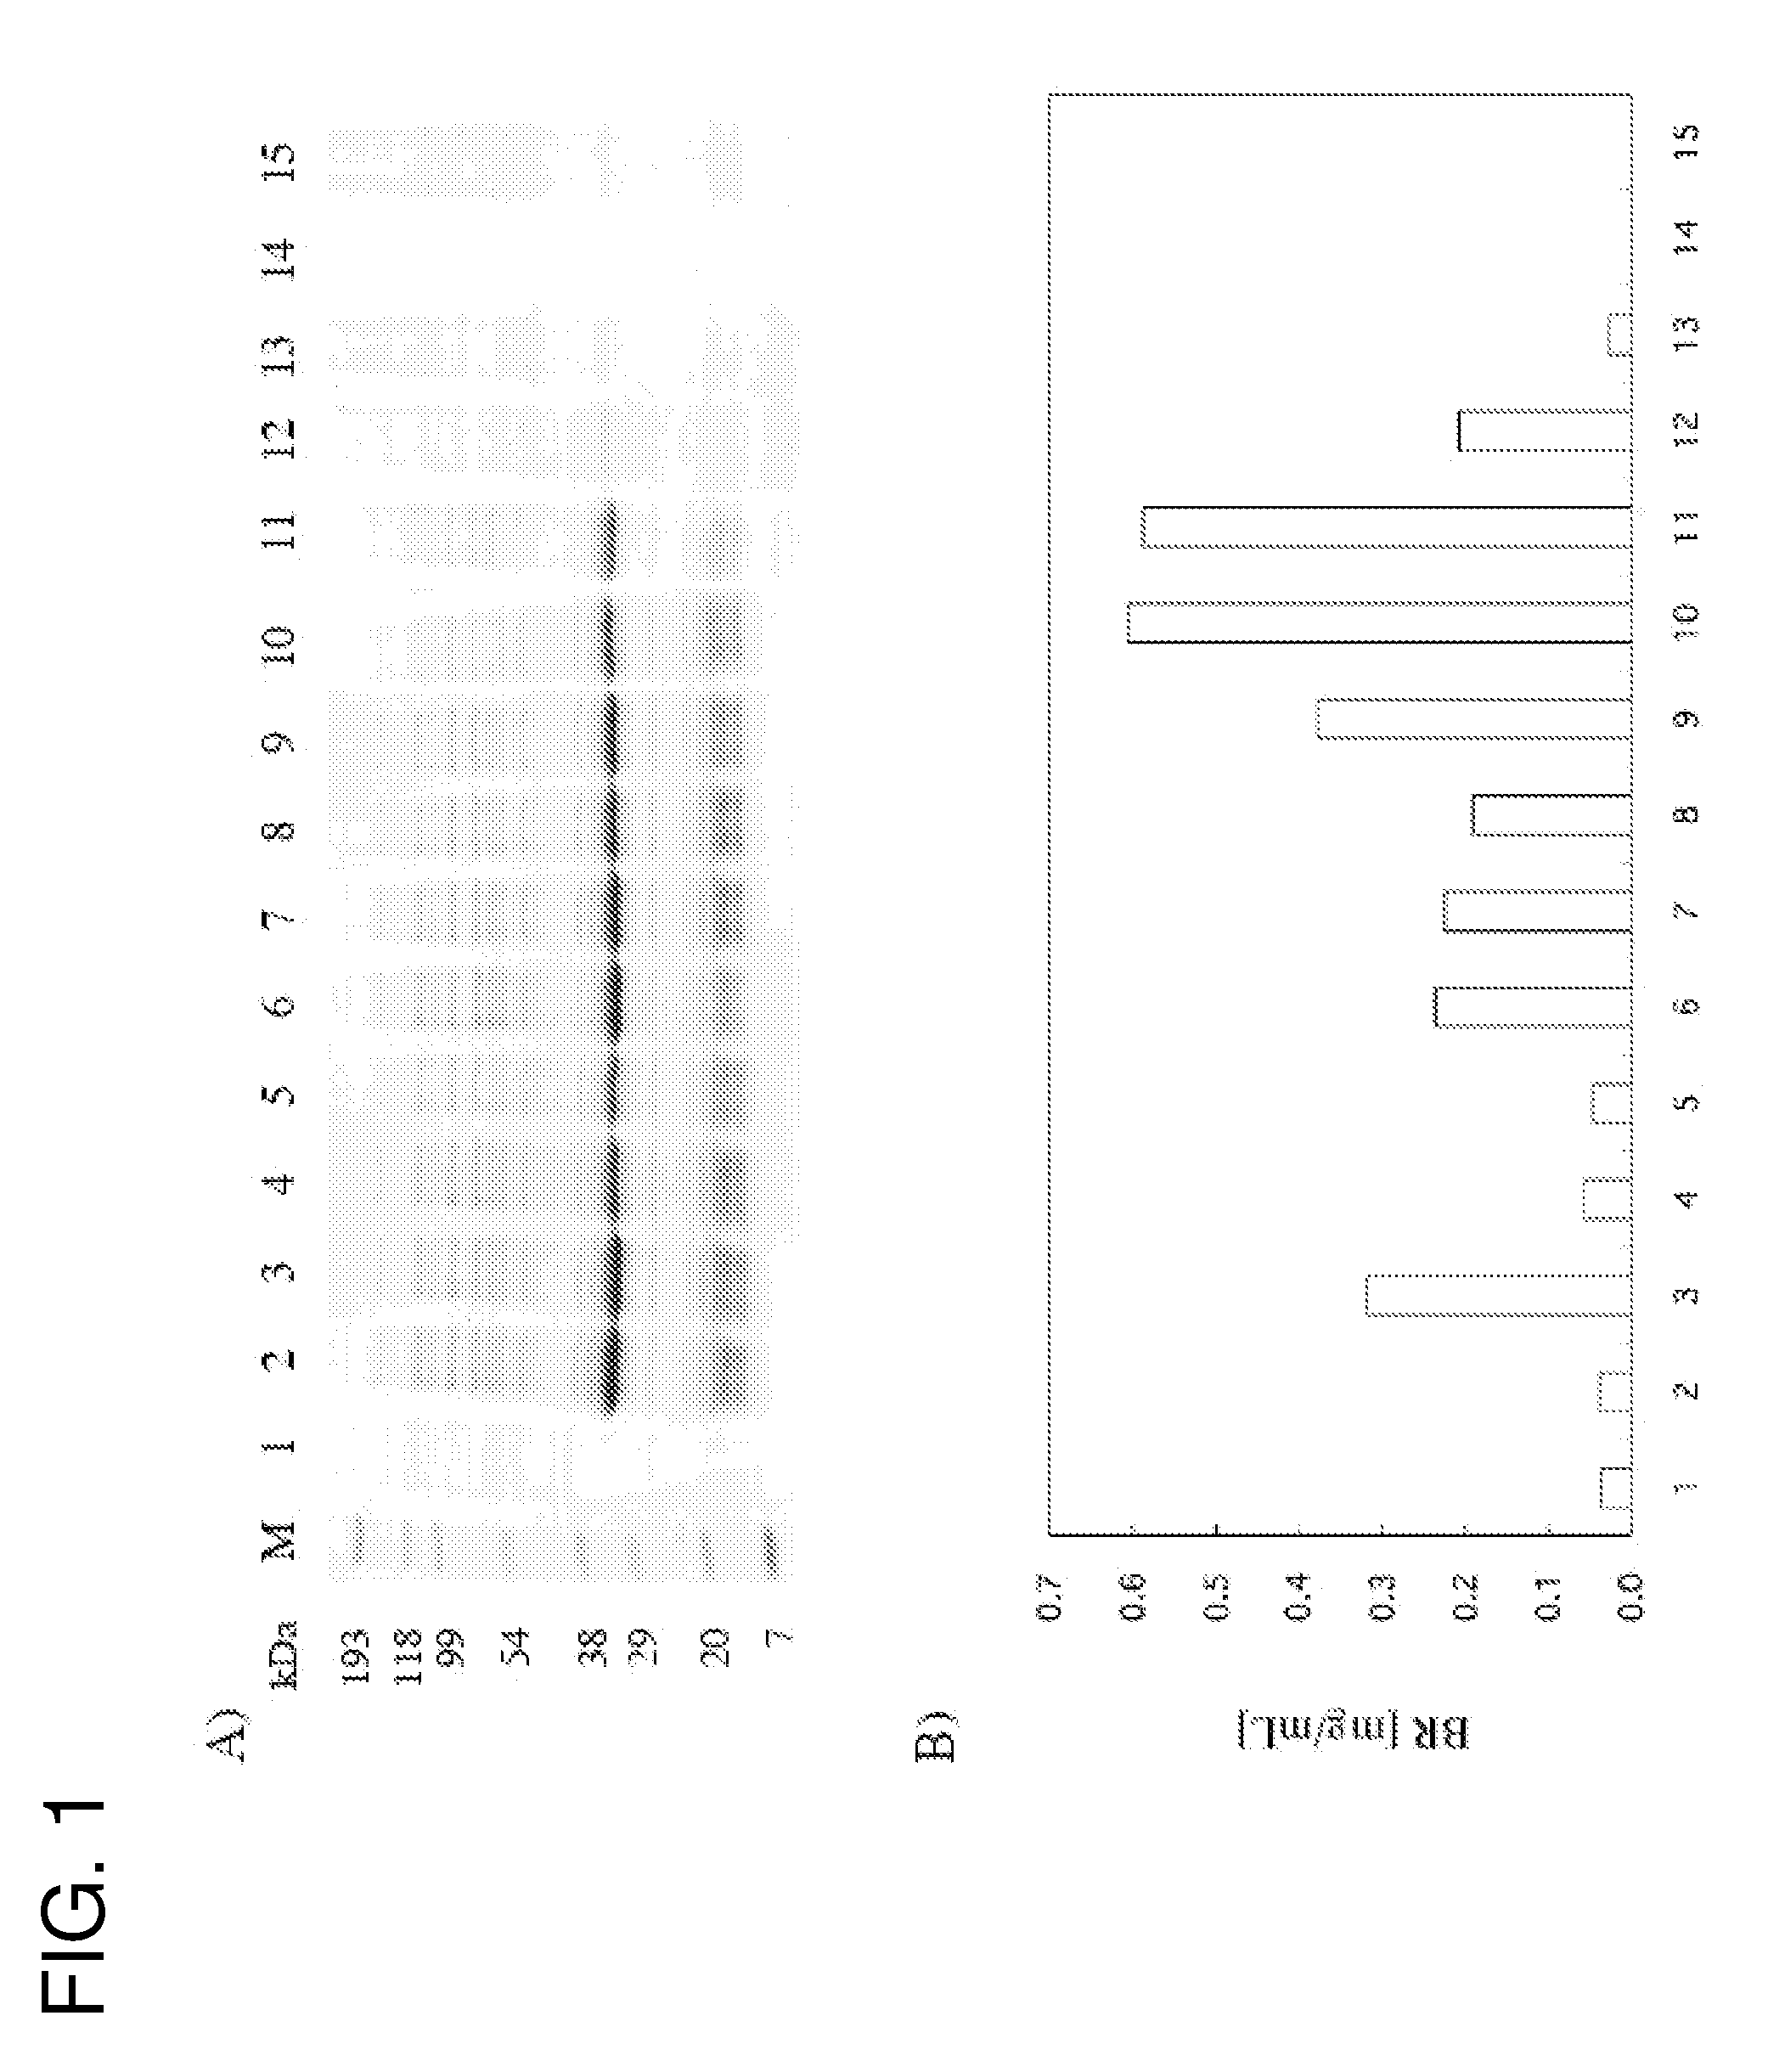 Method for producing a membrane protein